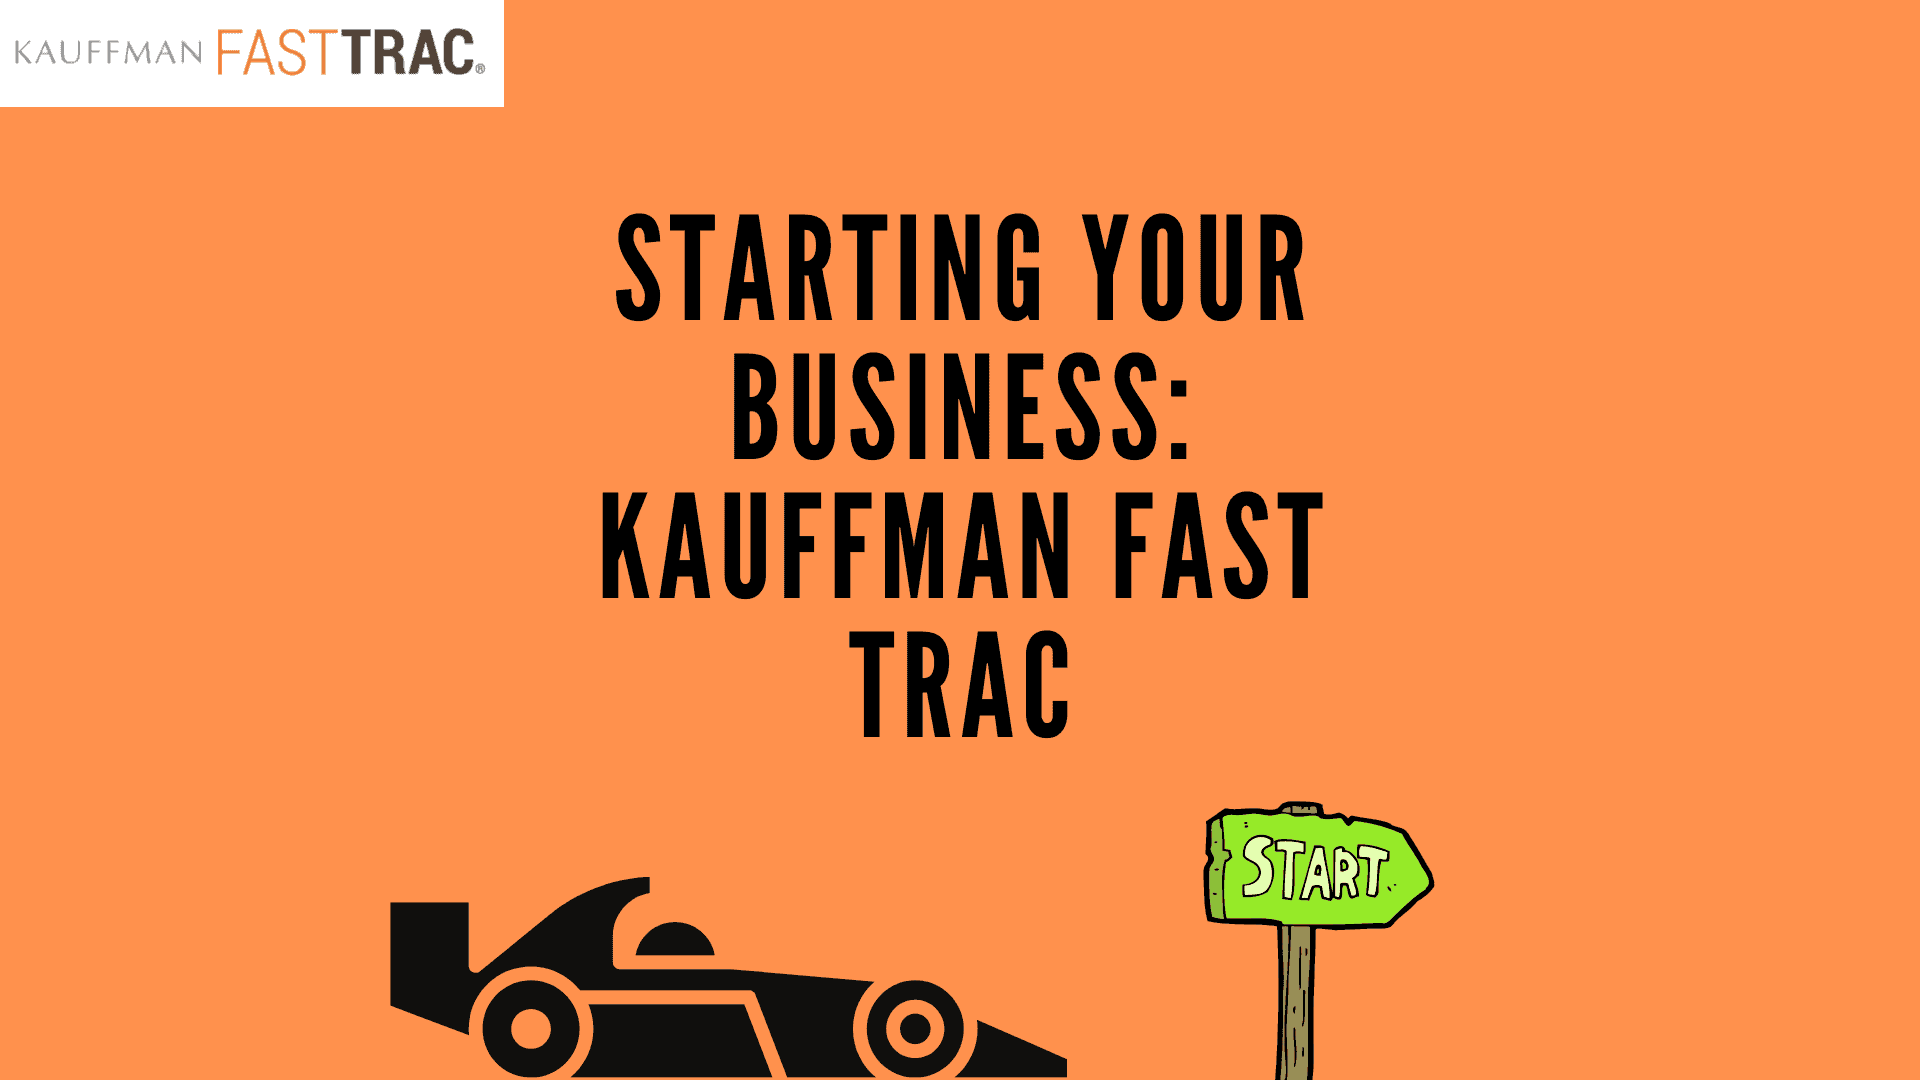 Starting Your Business: Kauffman Fast Trac